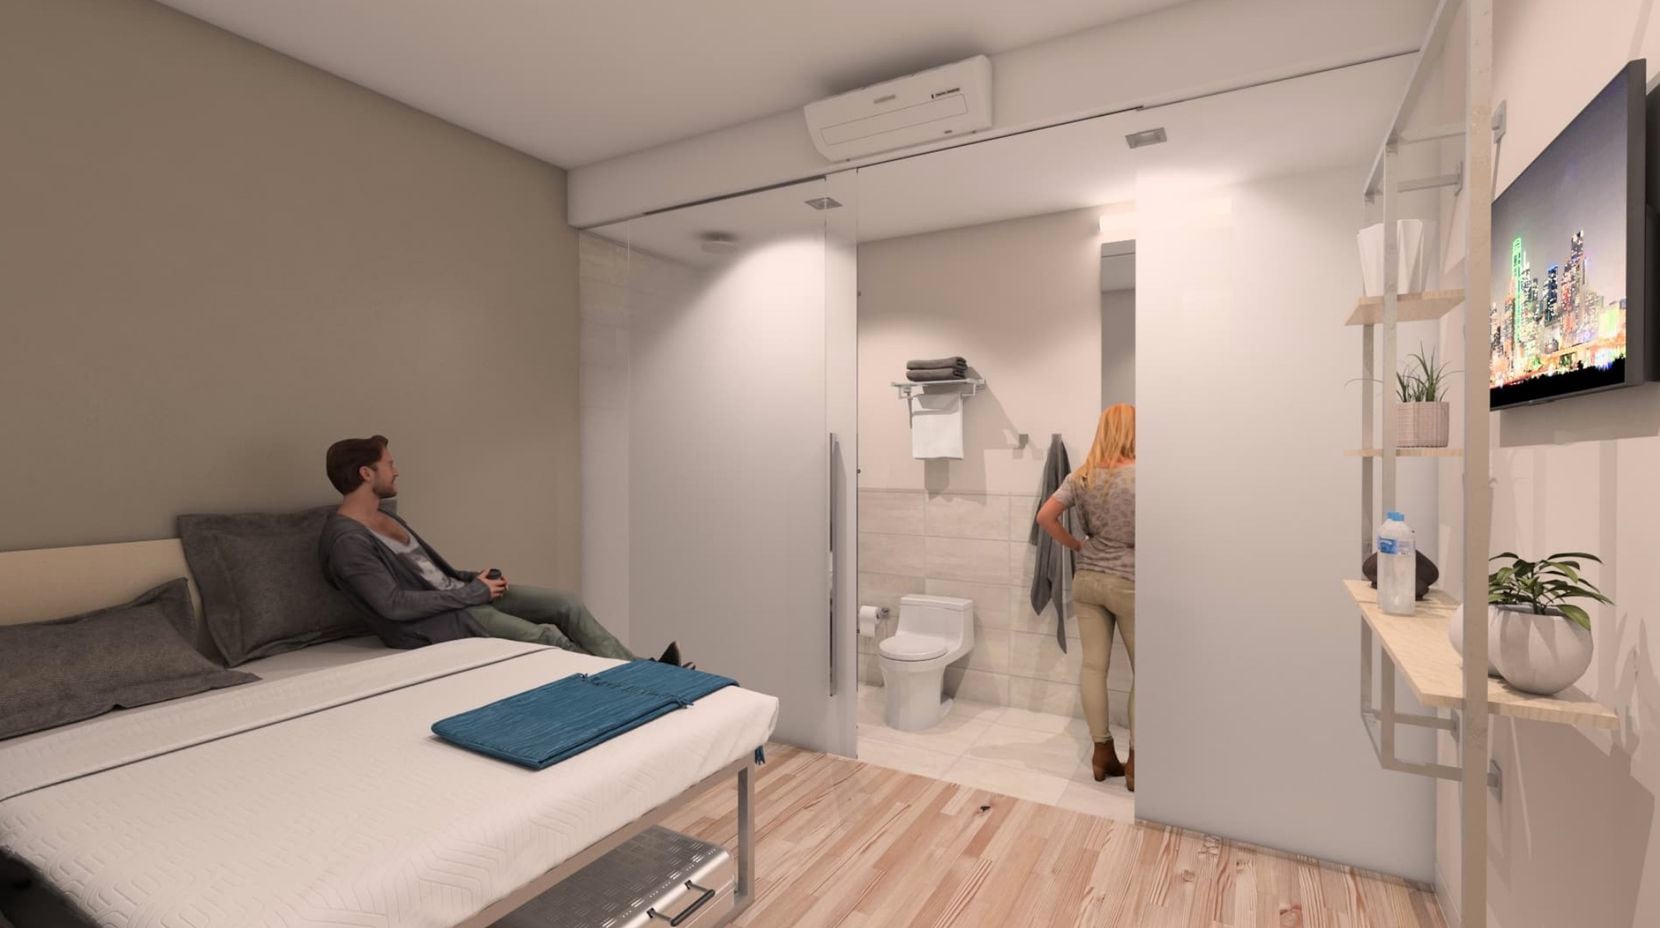 The SOVA Hotel rooms will have high-end furnishings and bath fixtures.